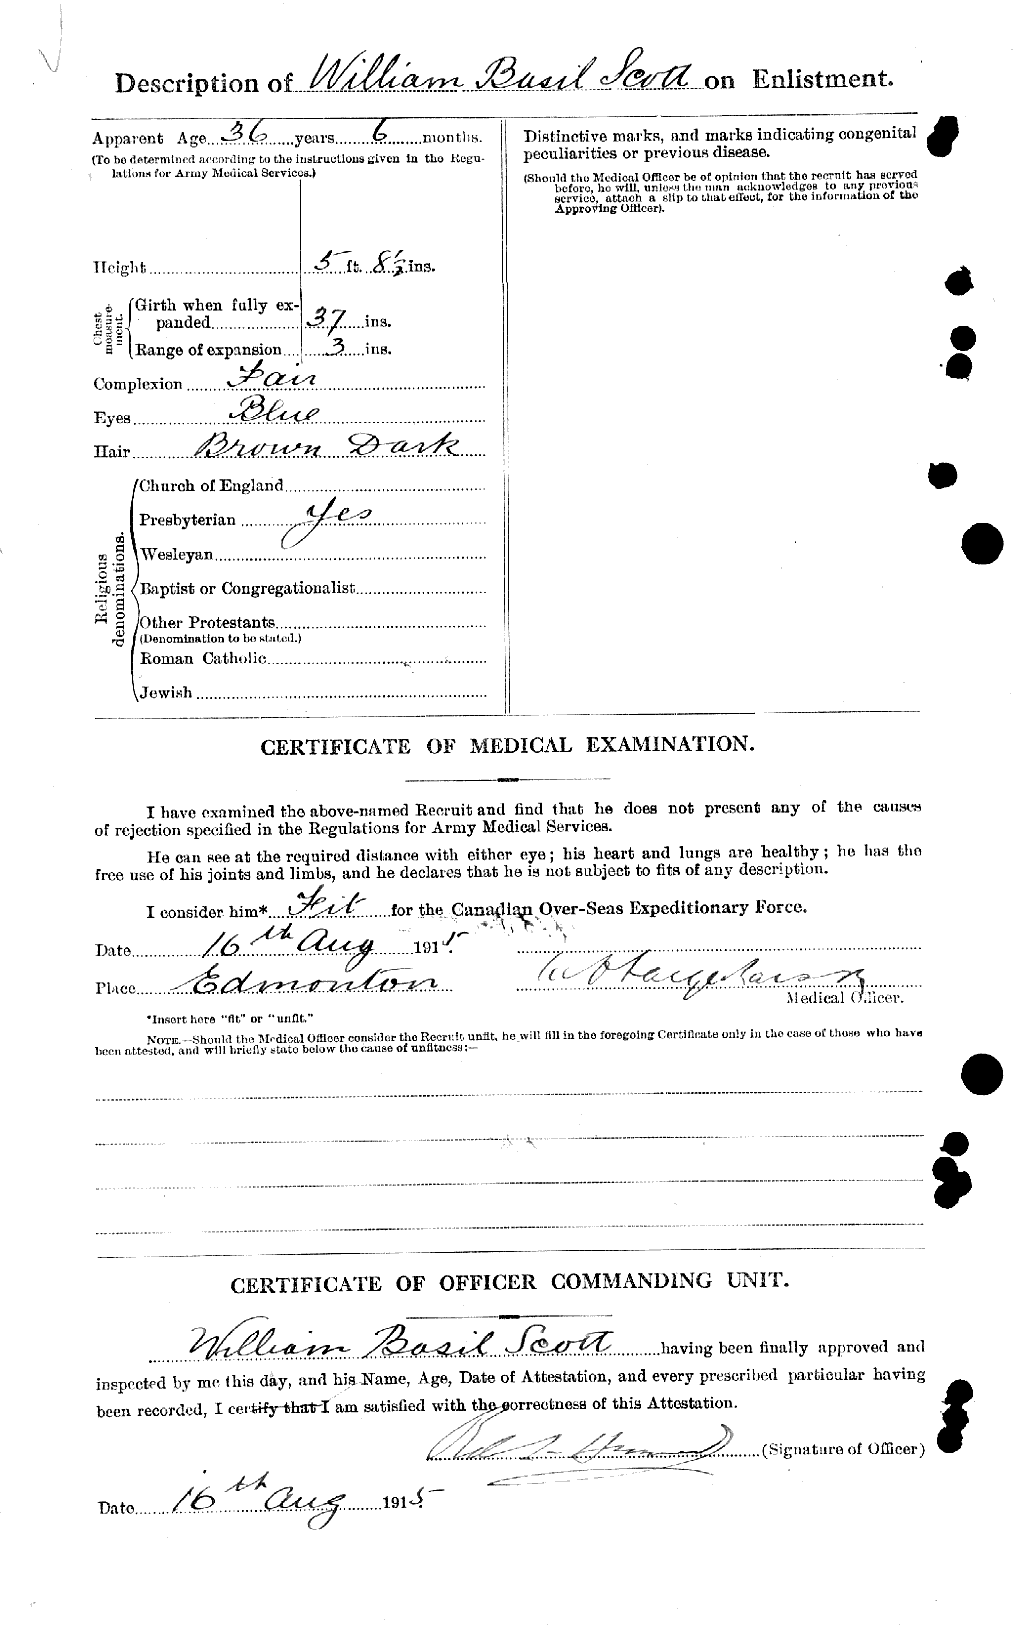 Personnel Records of the First World War - CEF 051310b